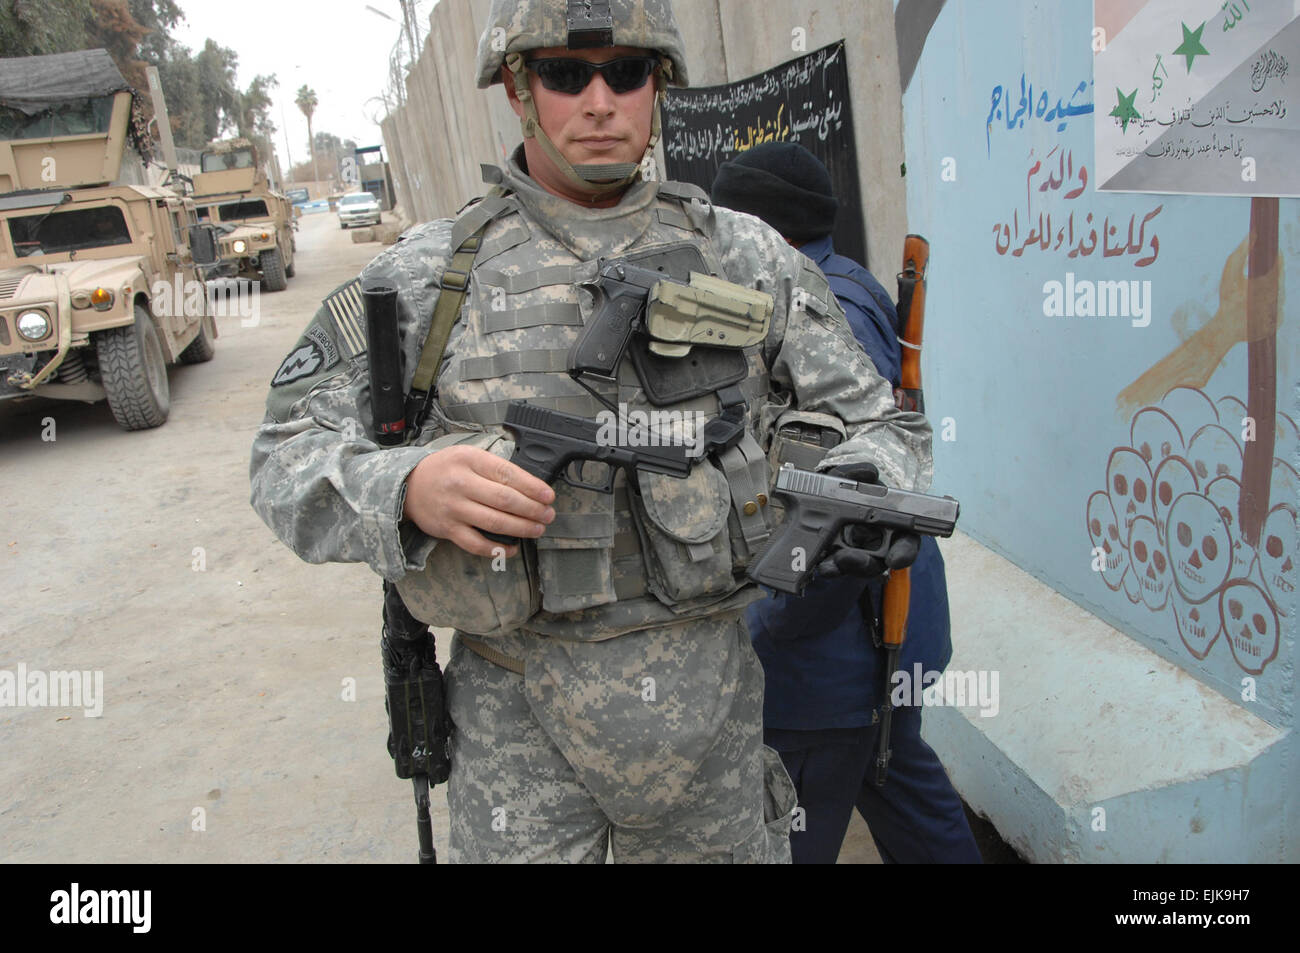 U.S. Army Staff Sgt. Terry Dahl, assigned to 9th Psychological Operations Battalion, holds a real .9-mm pistol in his right hand and a toy .9-mm pistol in his left hand at an Iraqi police station in Seddah, Iraq, Jan. 1, 2008, to demonstrate how similar the fake and real weapons look. Coalition forces are asking shop owners to stop selling the toys to children so they are not mistaken for insurgents.  Spc. Adam Sanders Stock Photo